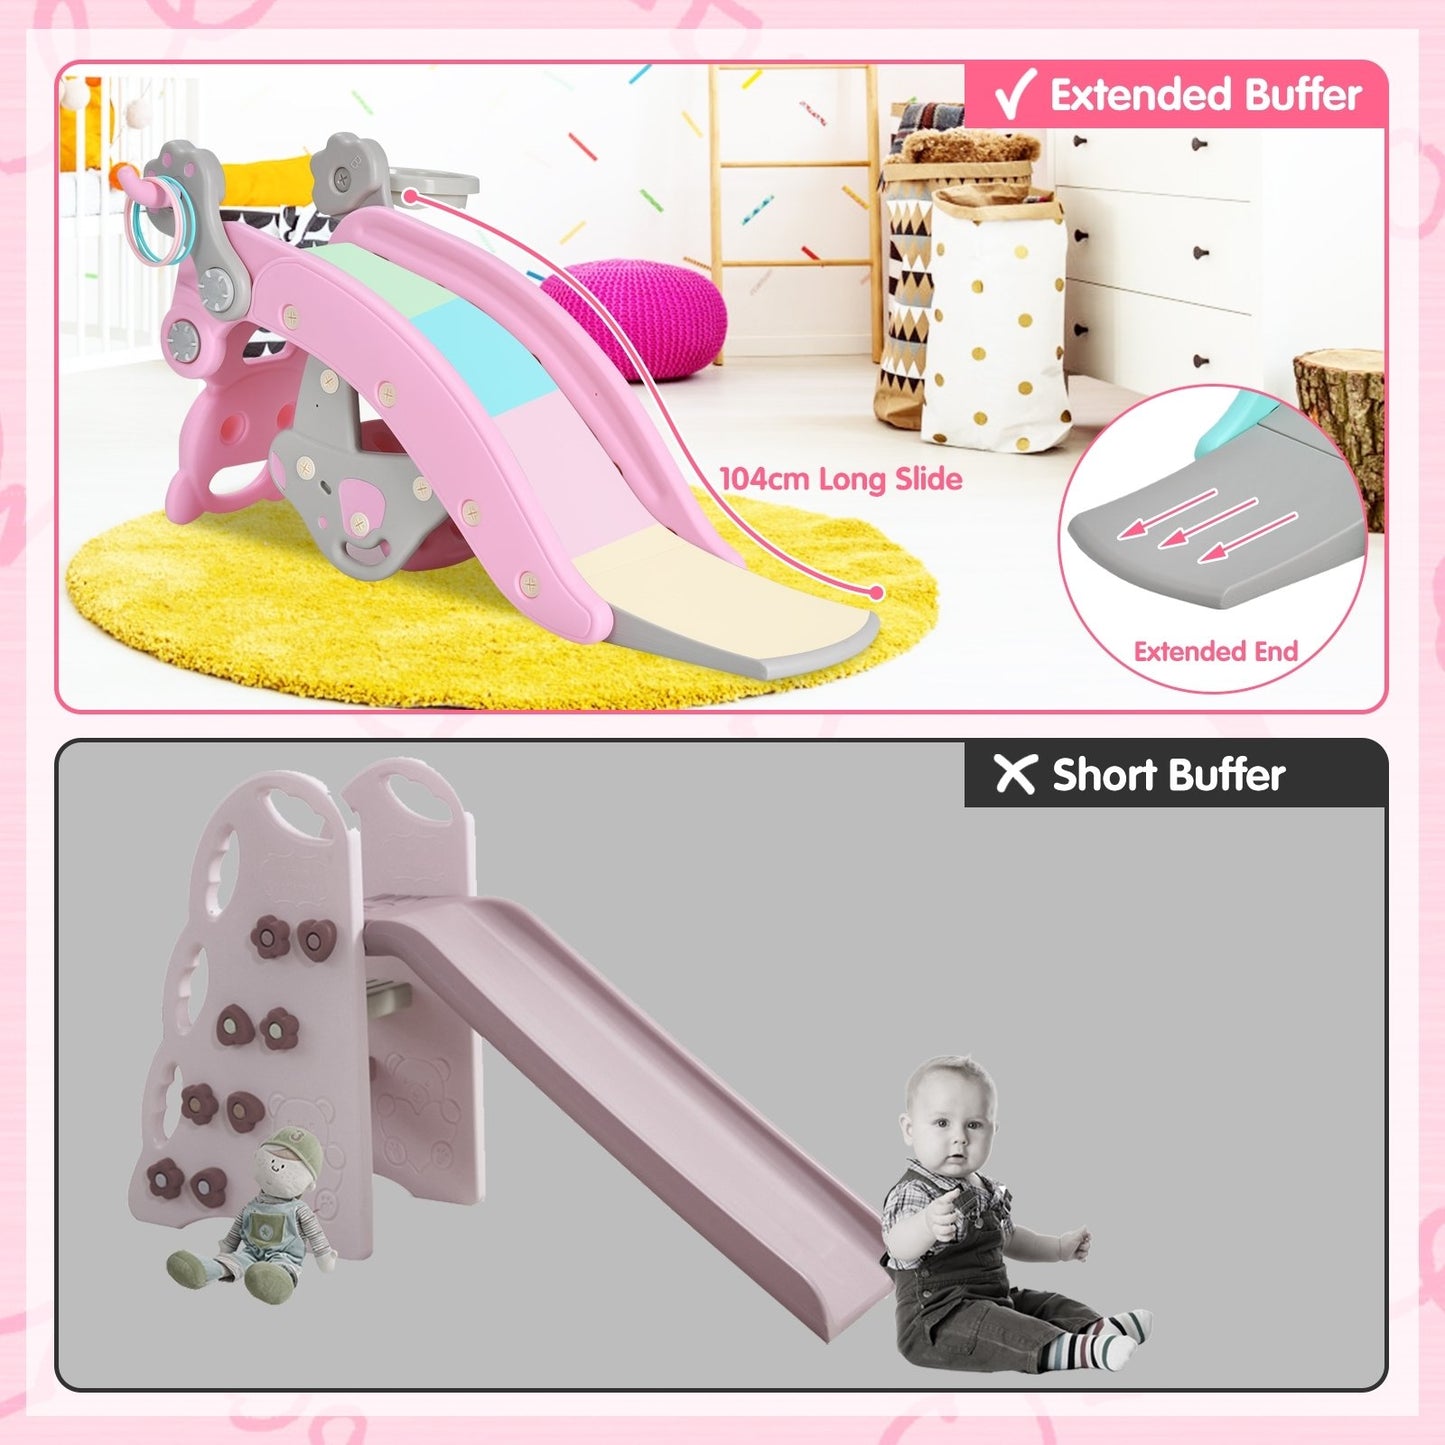 4-in-1 Toddler Slide and Rocking Horse Playset with Basketball Hoop, Pink